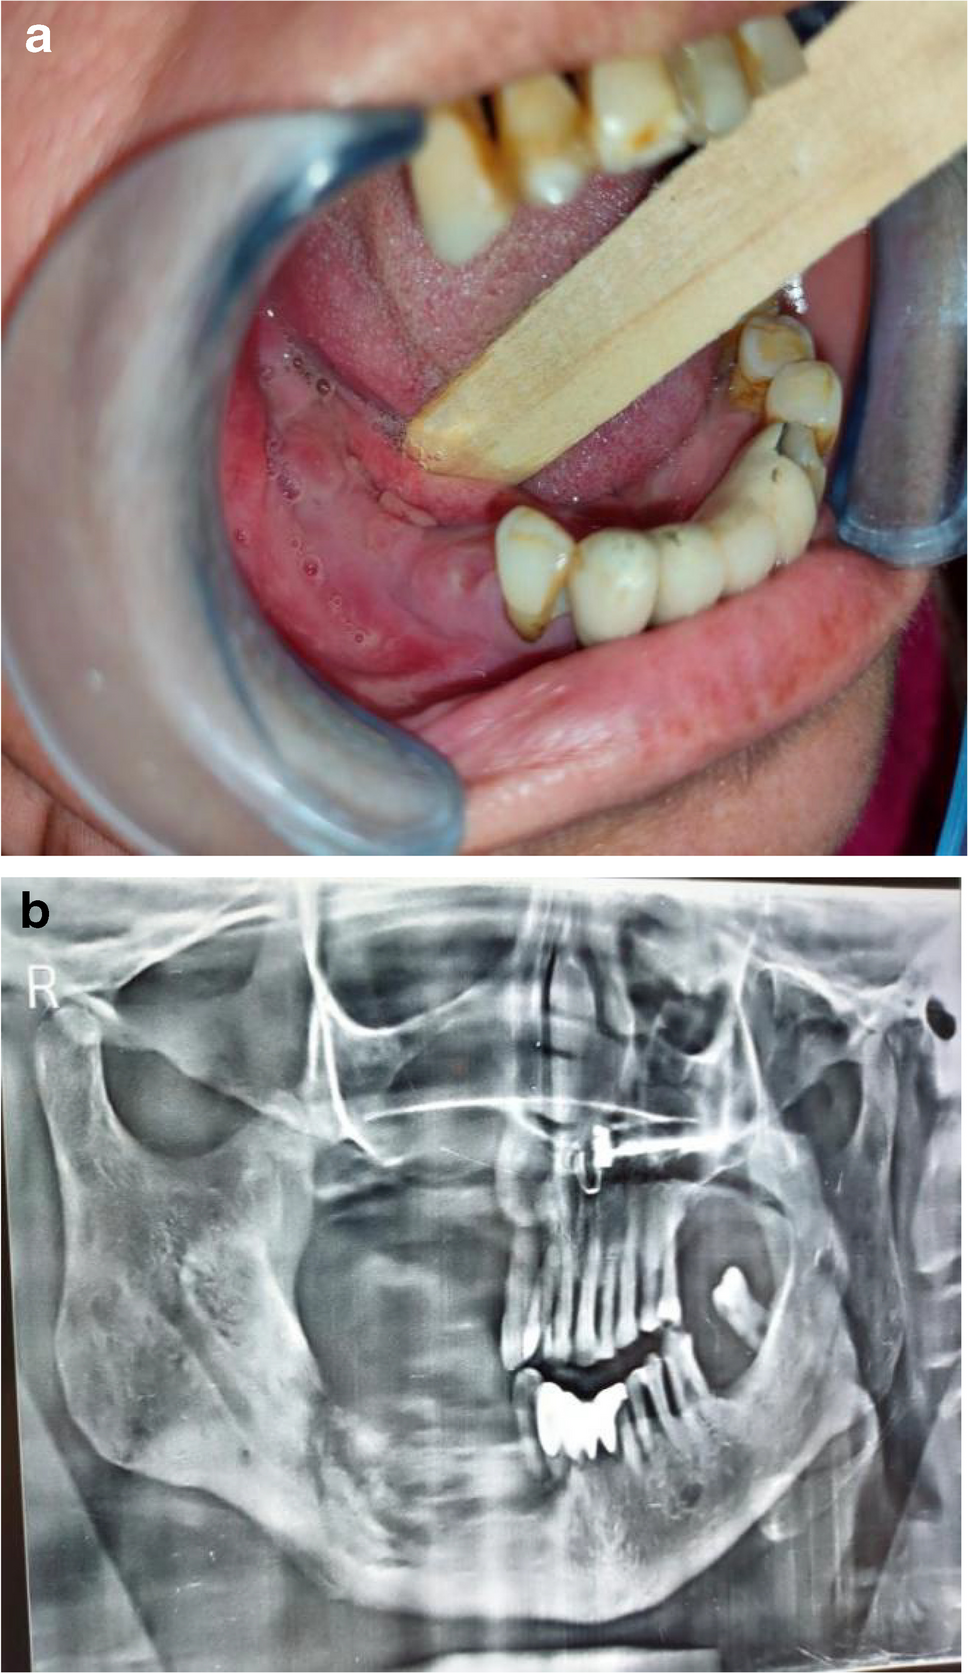 Debridement using Piezosurgical Device and Incorporation of Autologous Platelet-Rich Fibrin in Management of Stage III Medication-Related Osteonecrosis of the Jaw — A Case study and Review of Literature